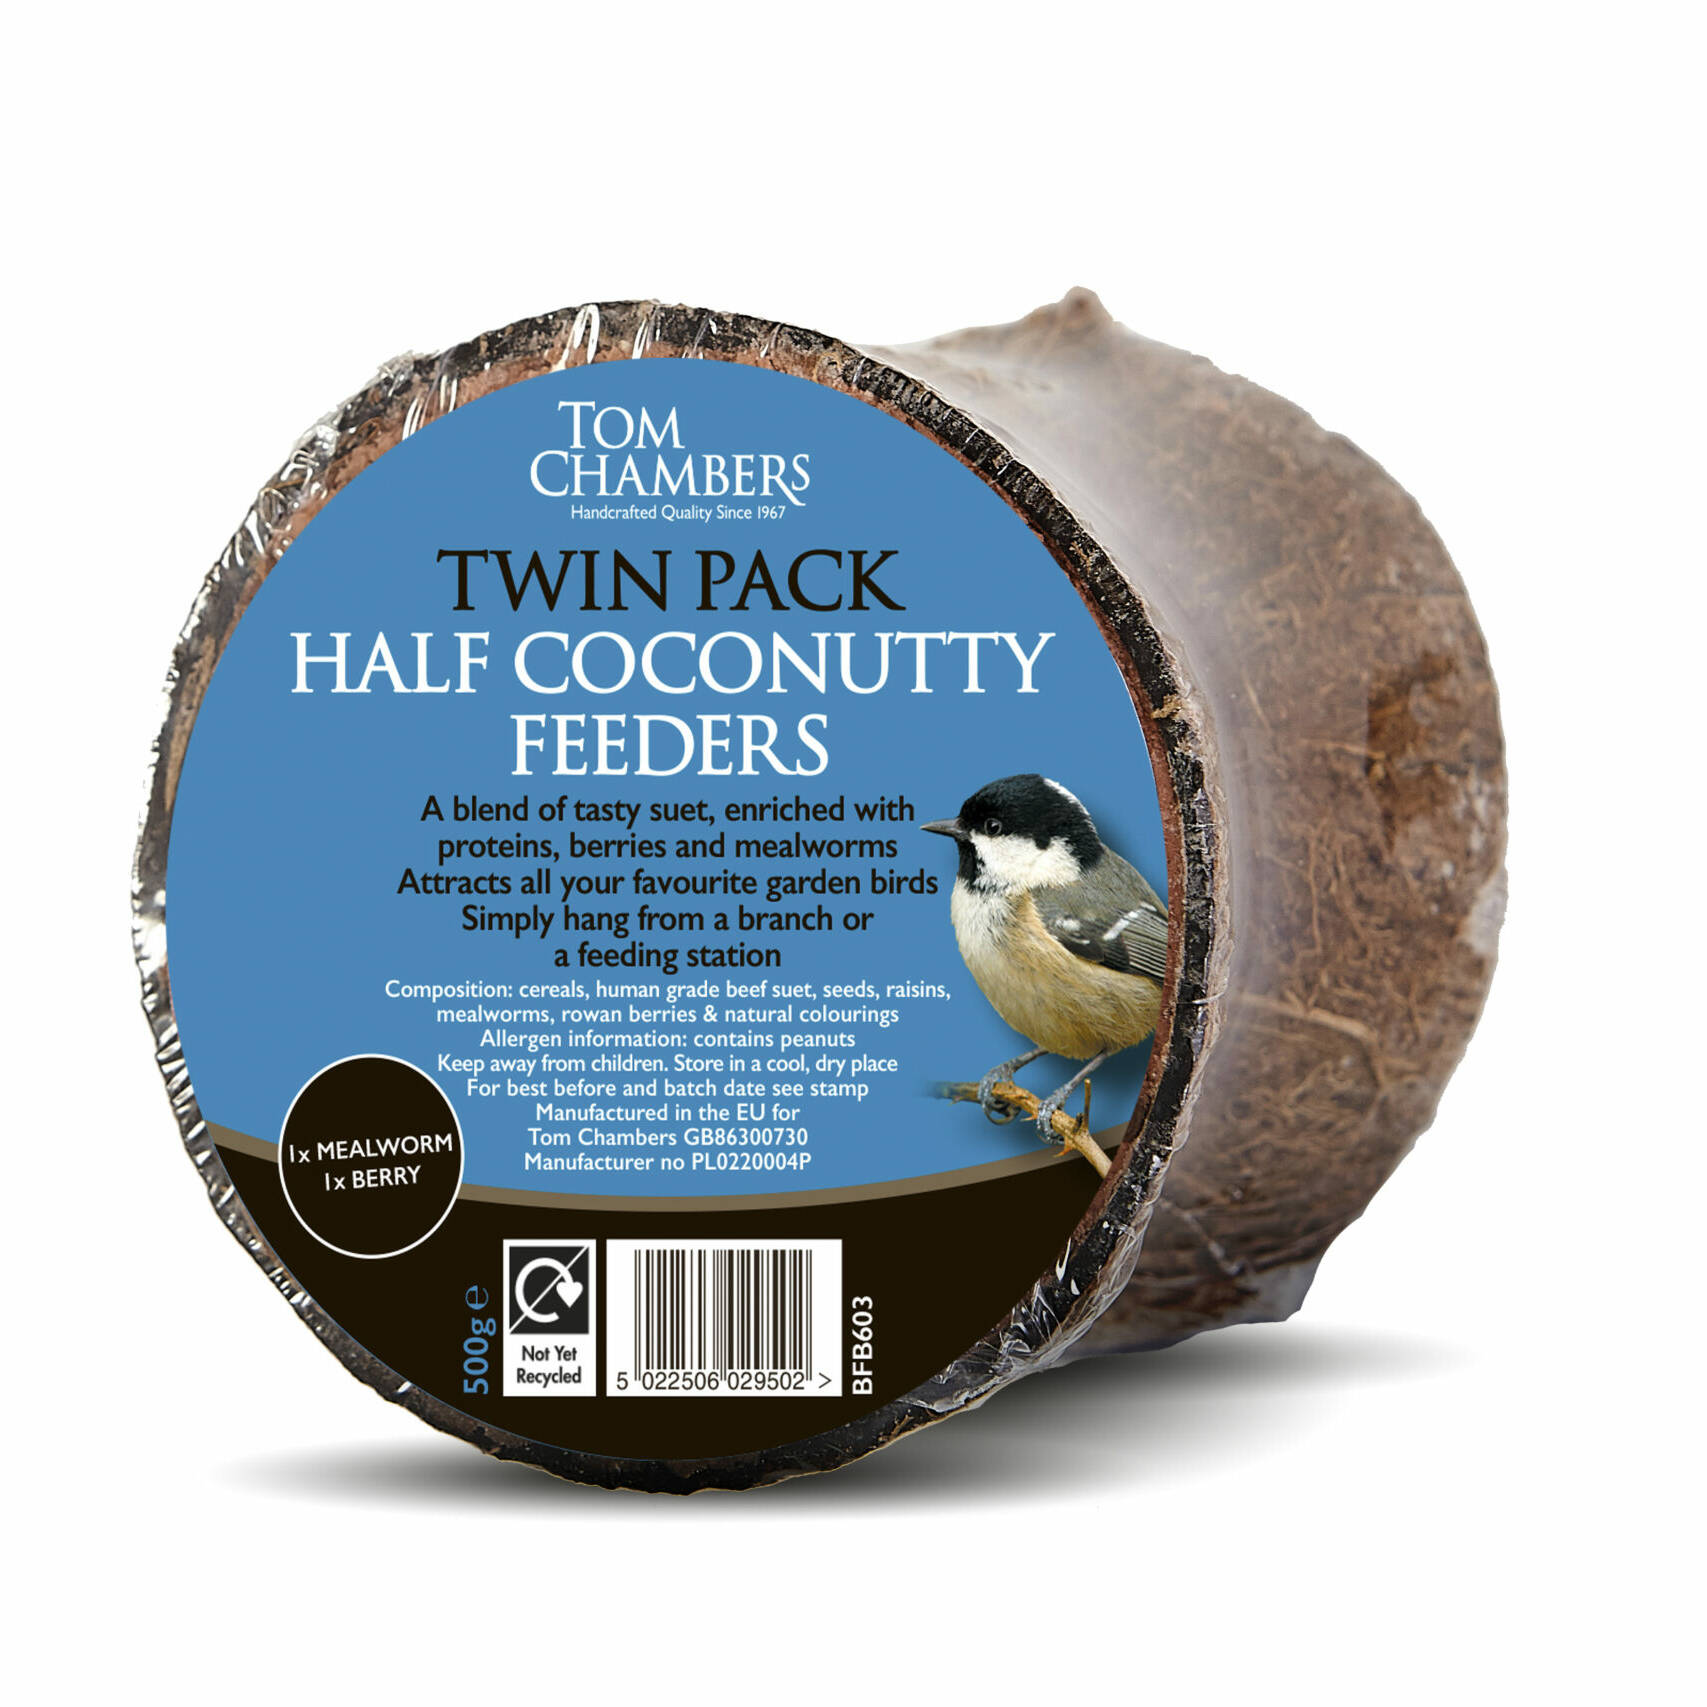 Tom chambers Coconut- twin pack of half coconut